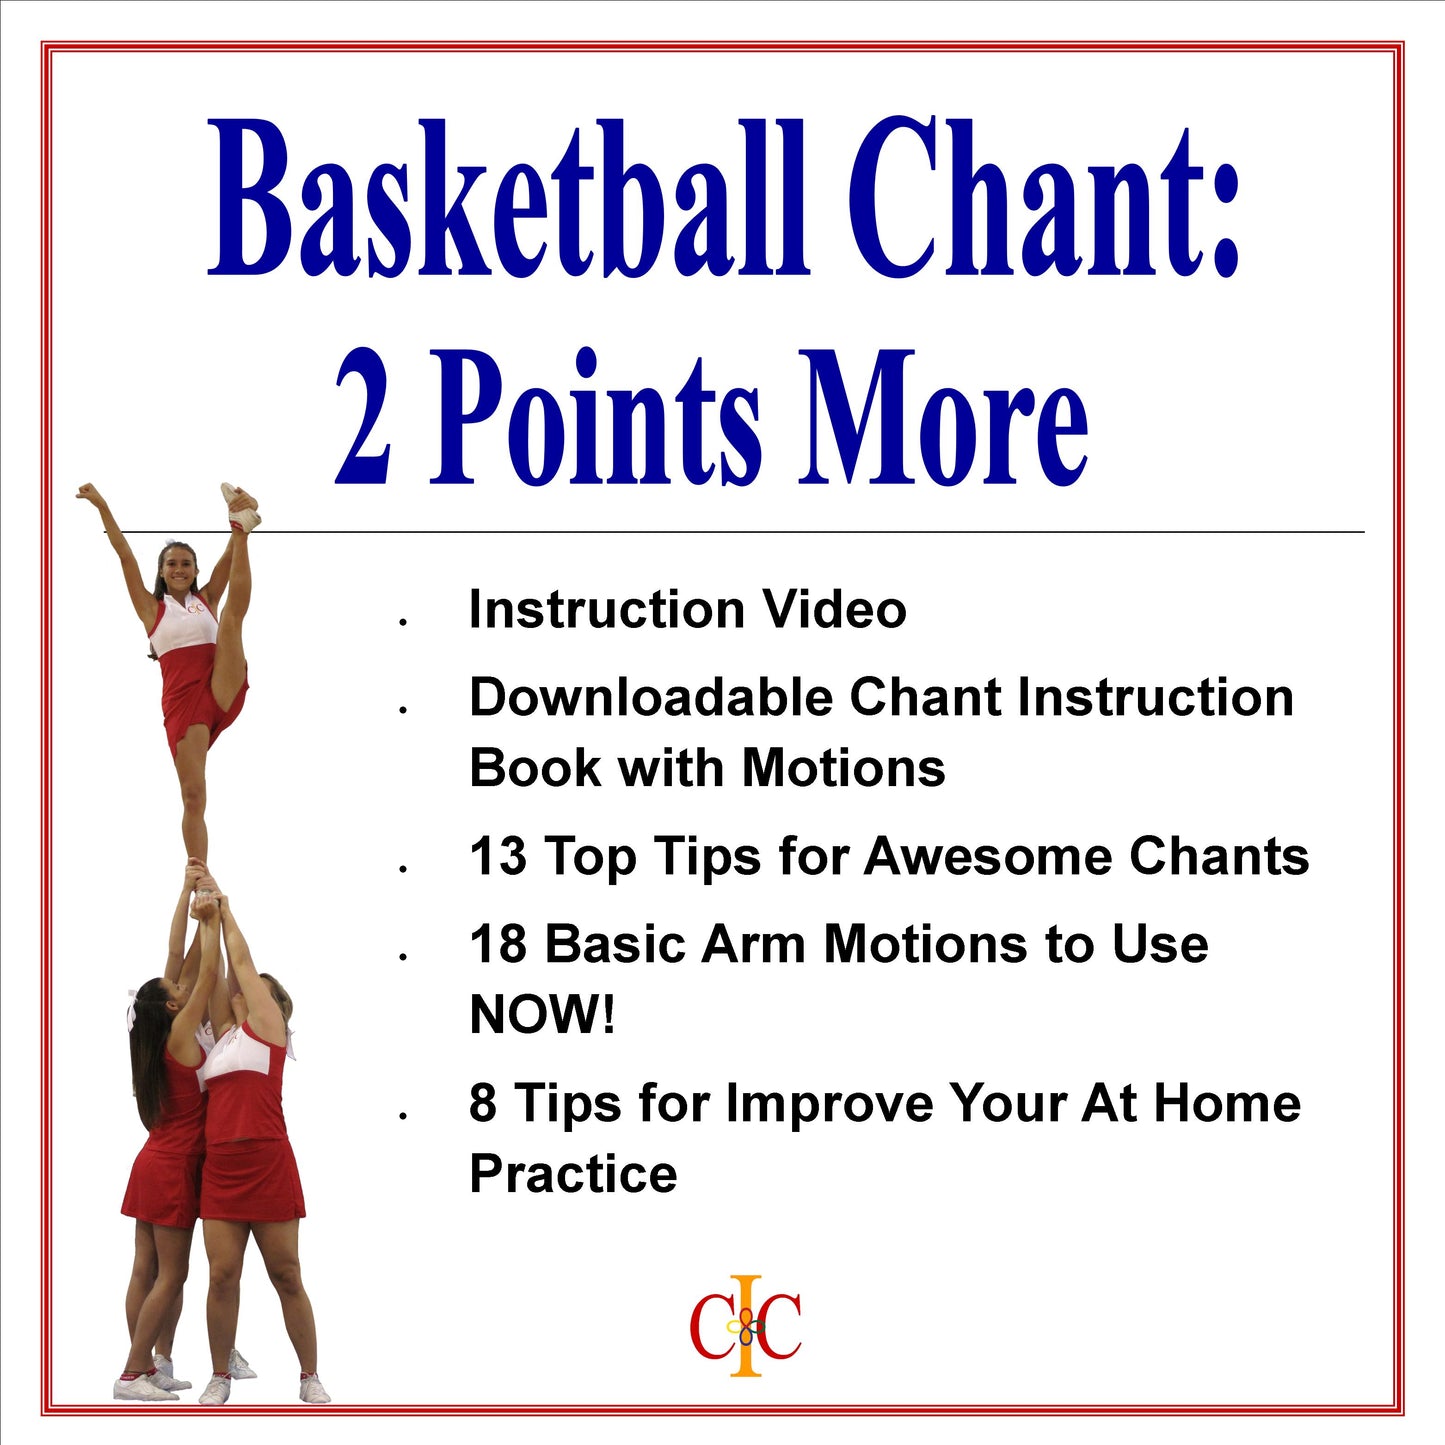 Load image into Gallery viewer, Cheerleading Chant - 2 Points More - Basketball Chant - Cheer and Dance On Demand
